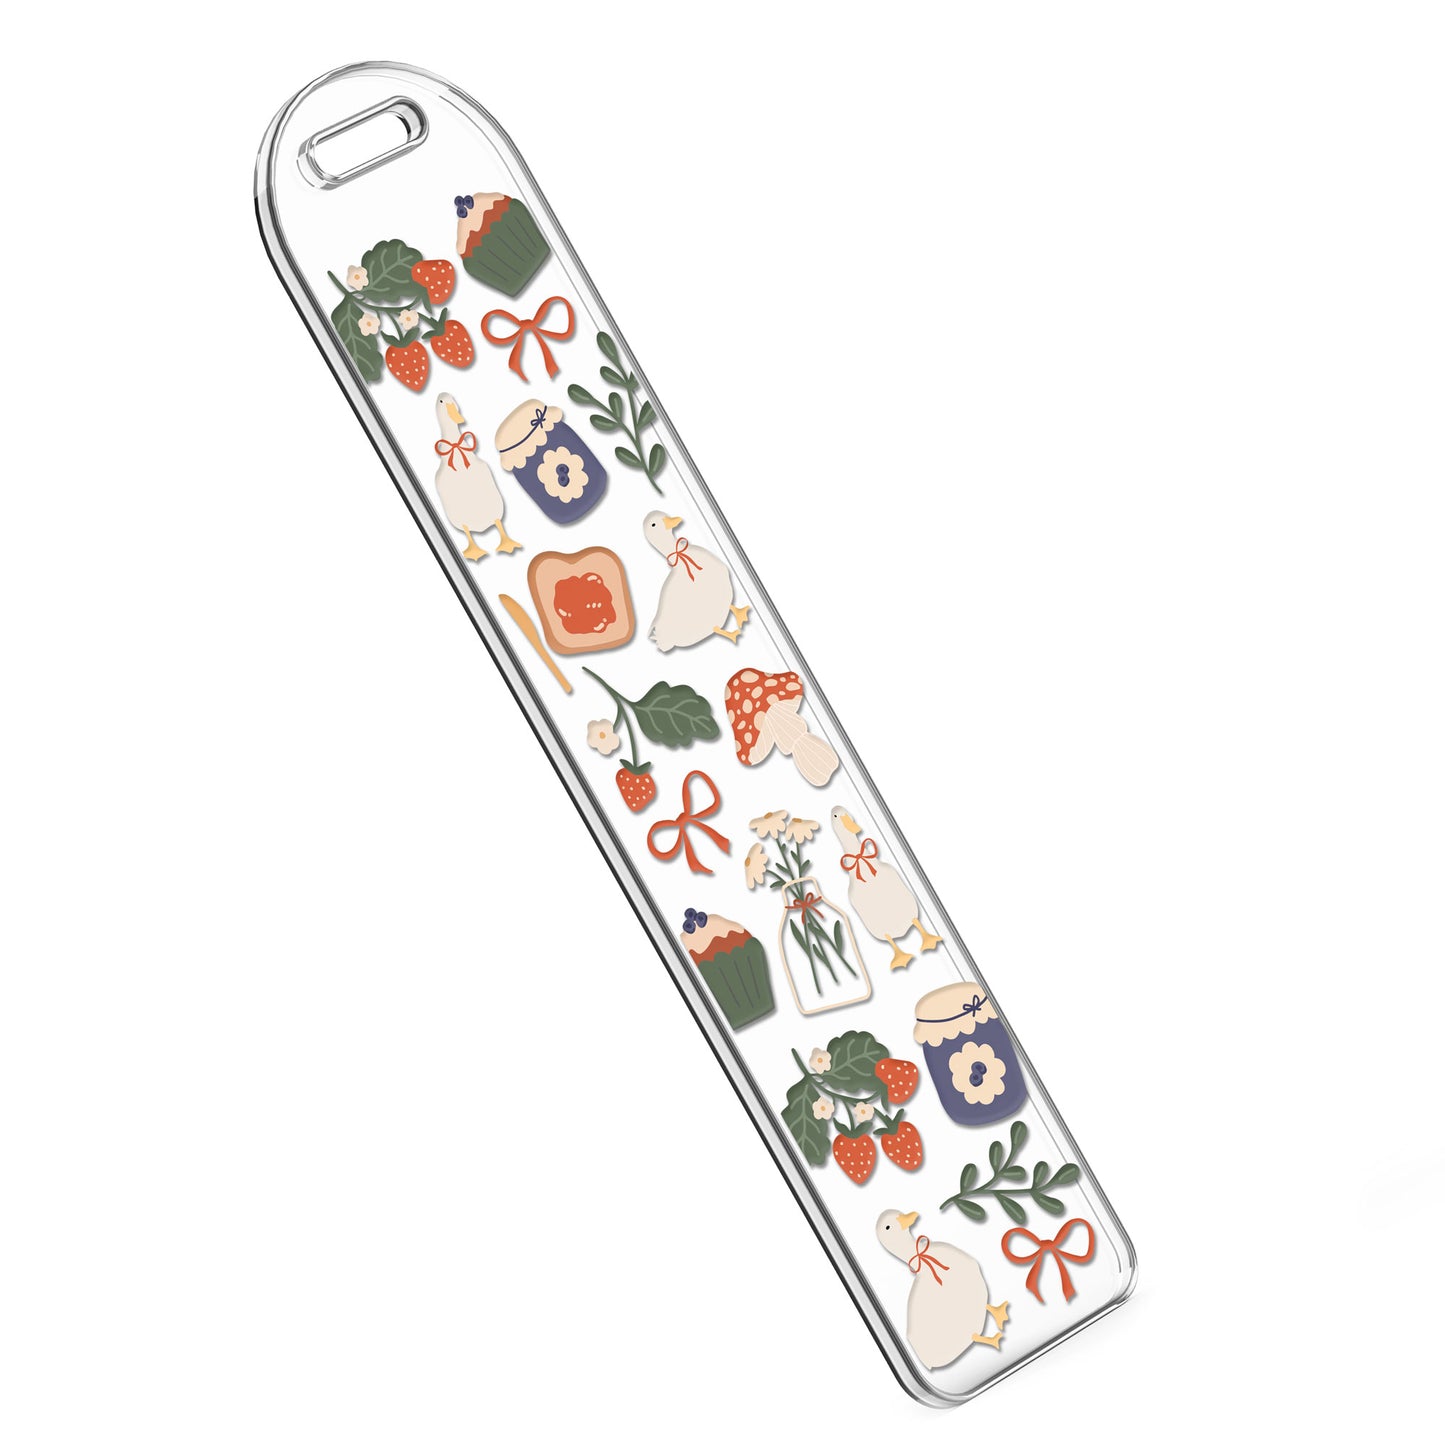 Bookmark UV DTF Decal | Cottage Core Kitchen